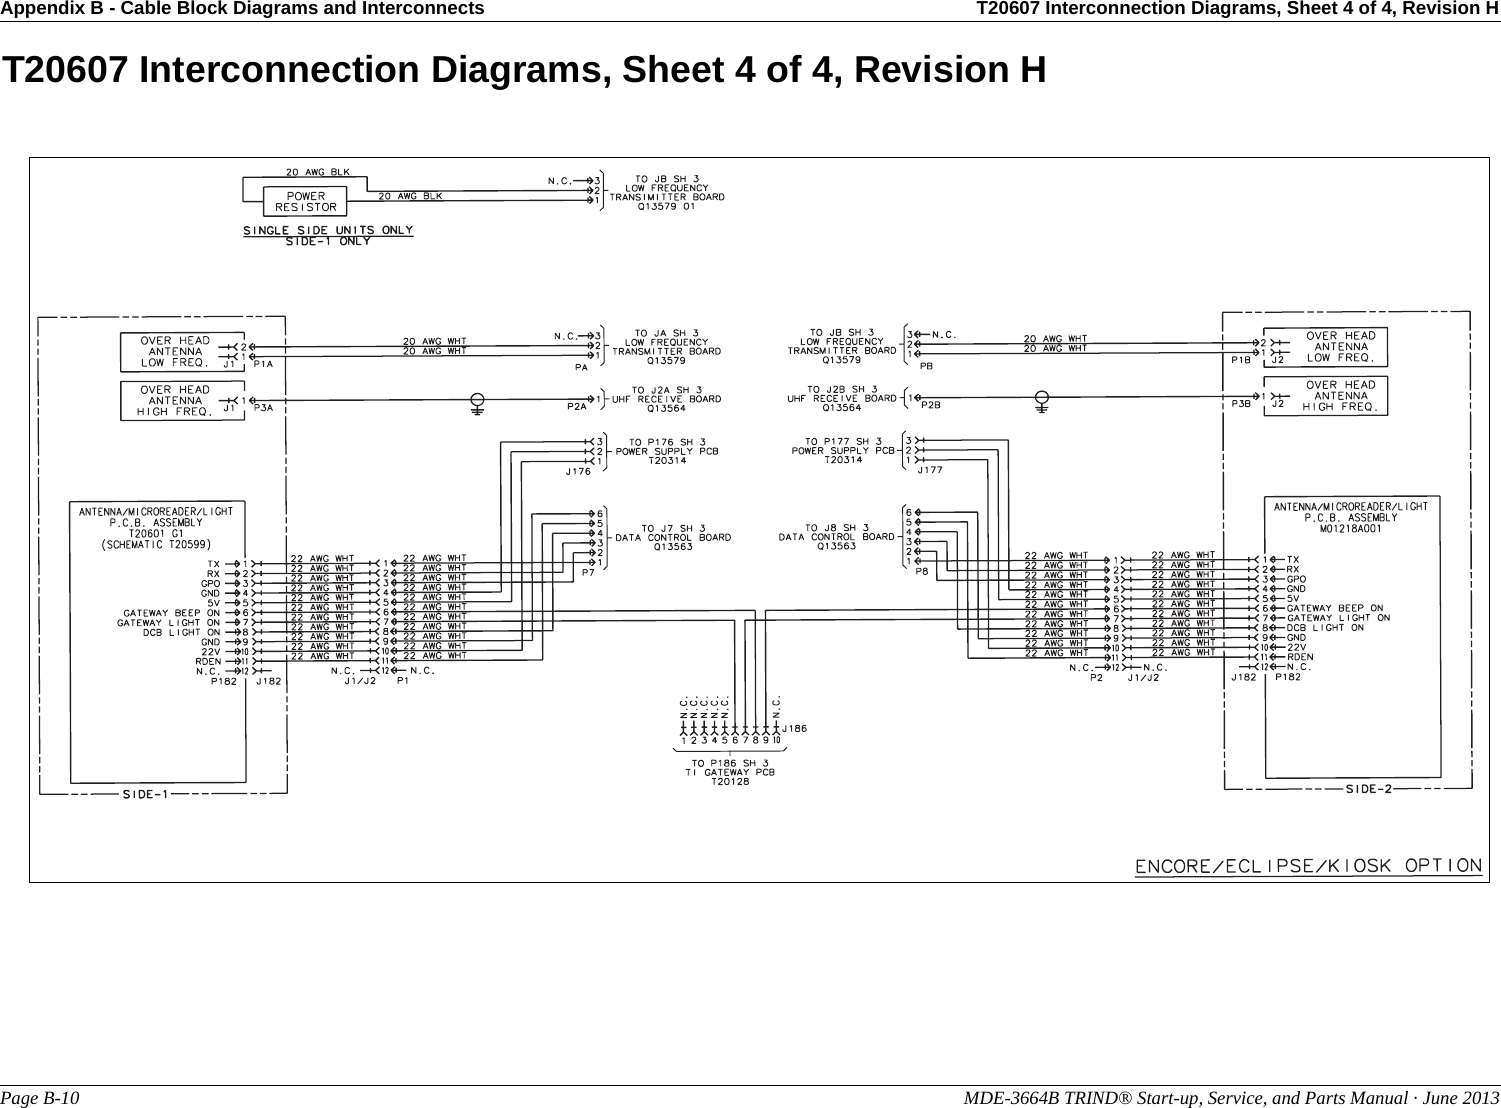 Appendix B - Cable Block Diagrams and Interconnects T20607 Interconnection Diagrams, Sheet 4 of 4, Revision HPage B-10                                                                                                               MDE-3664B TRIND® Start-up, Service, and Parts Manual · June 2013T20607 Interconnection Diagrams, Sheet 4 of 4, Revision H